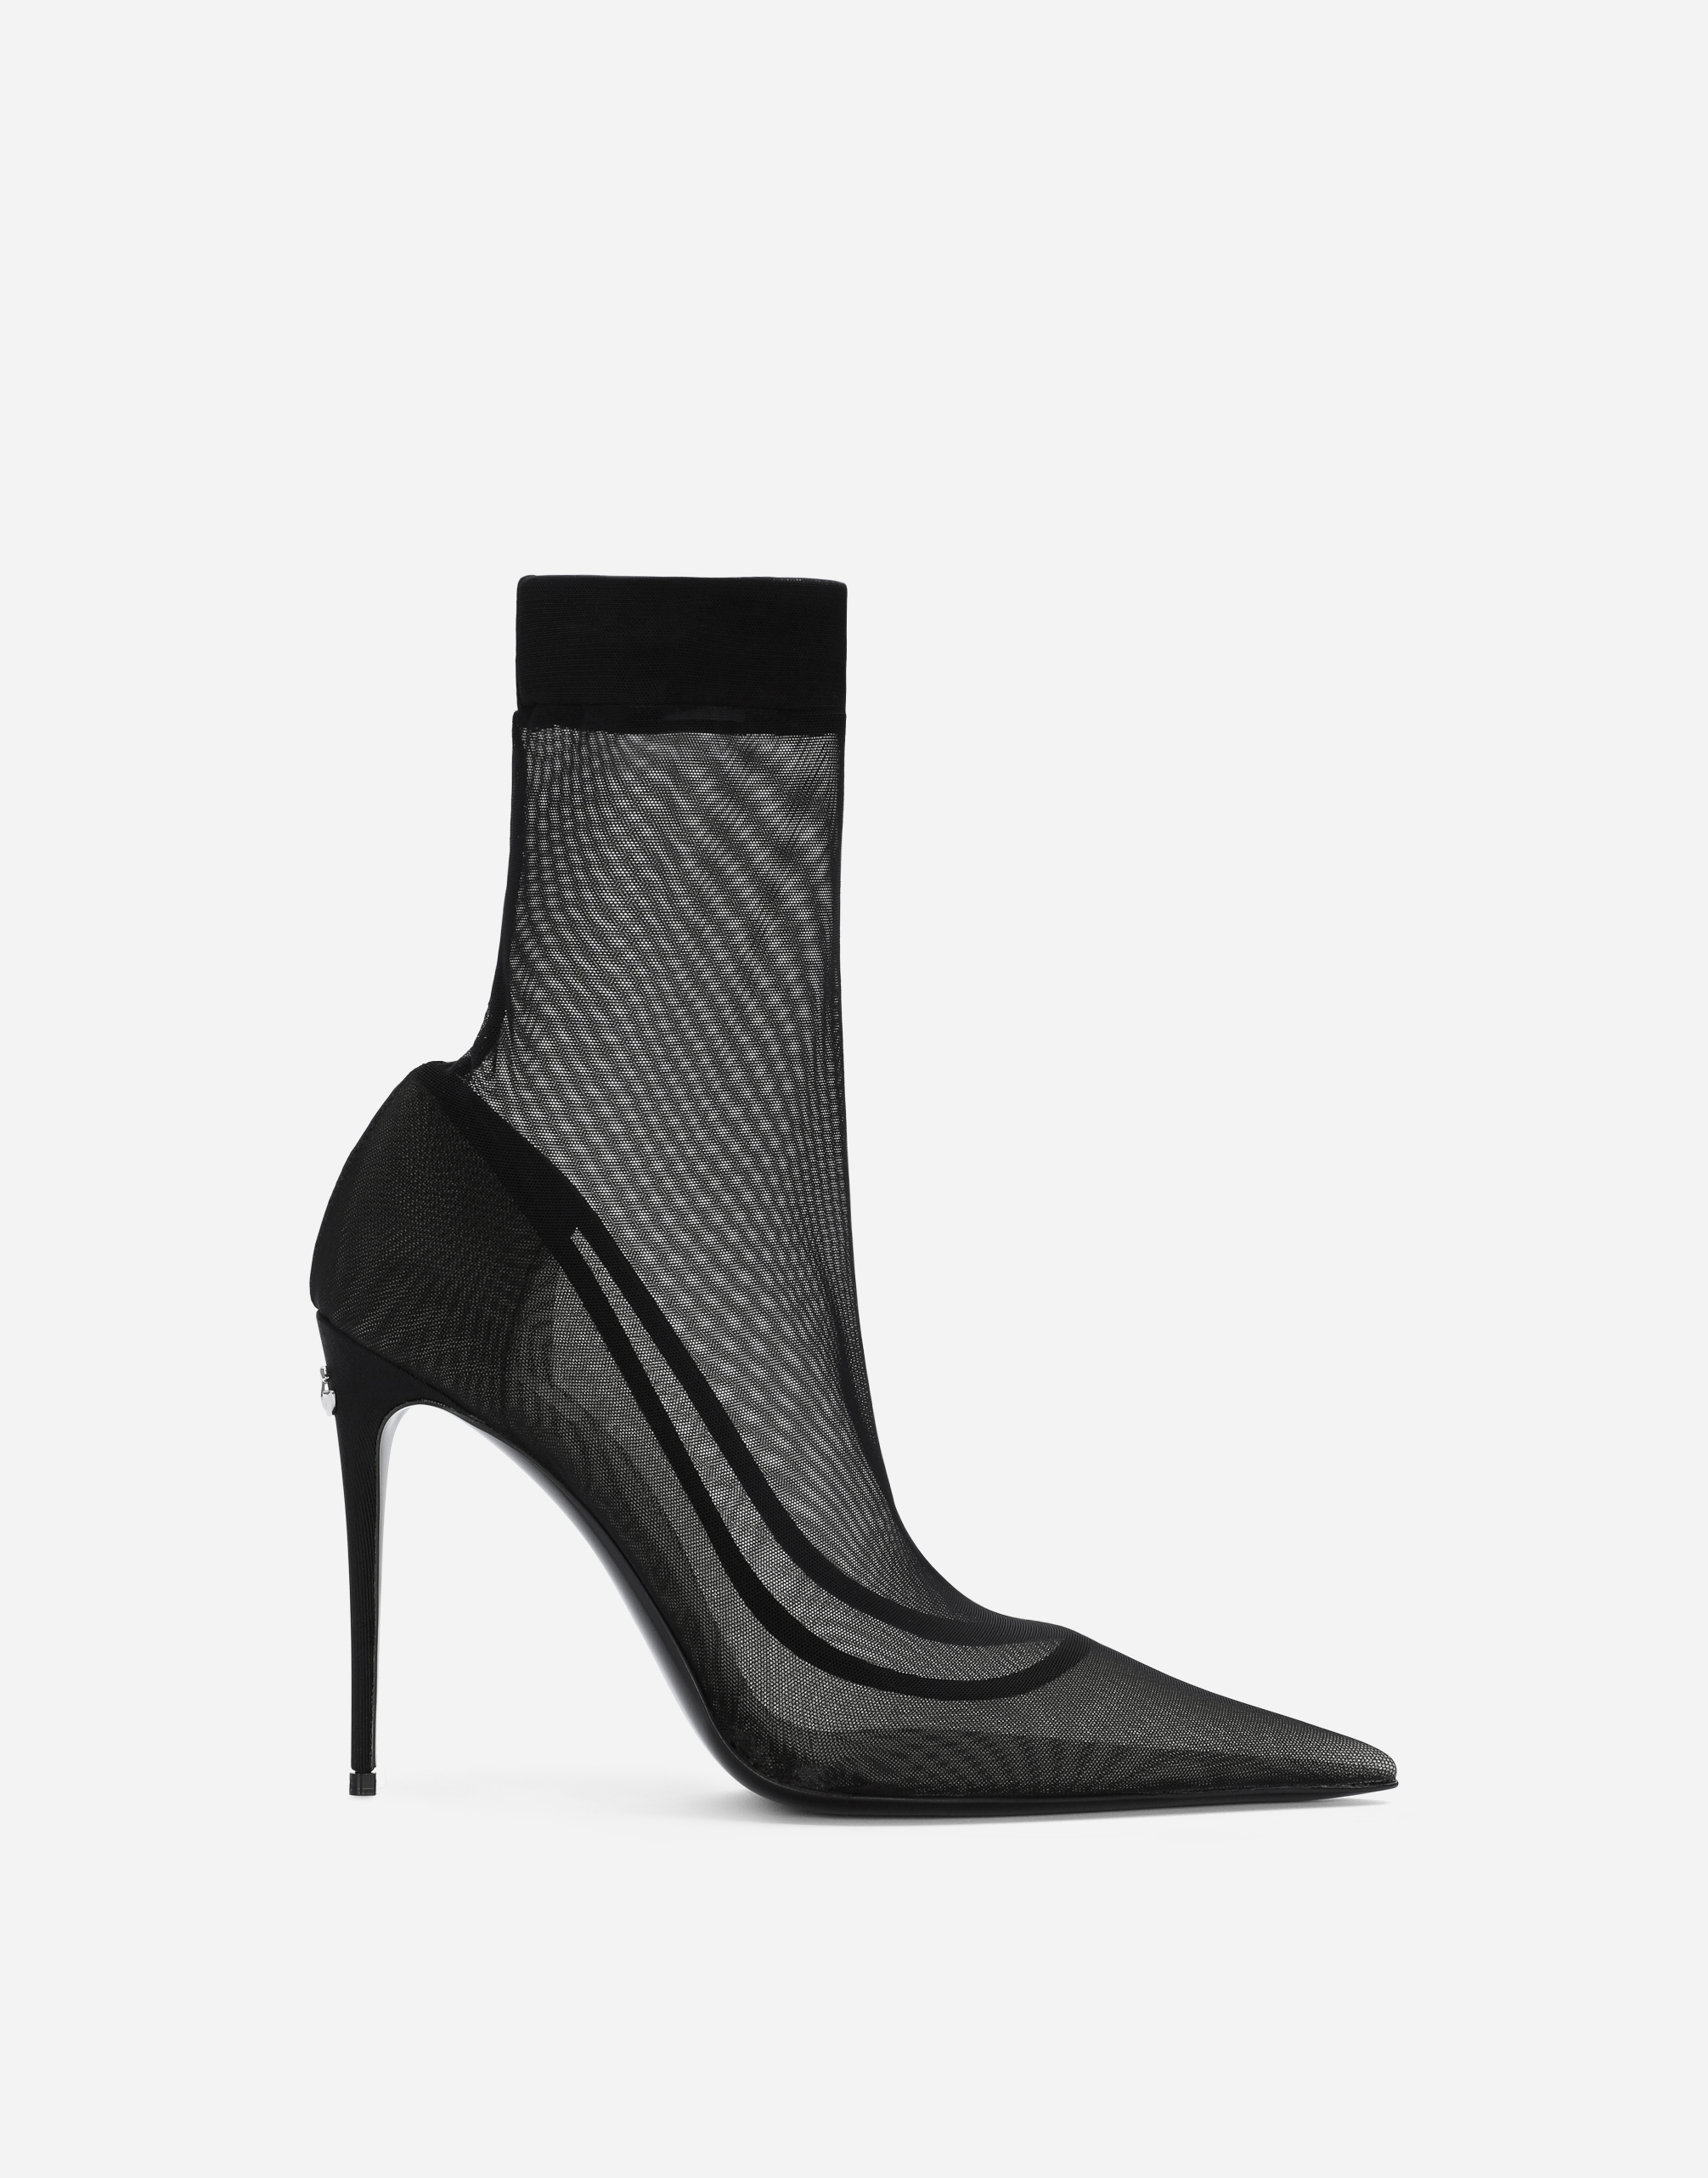 KIM DOLCE&GABBANA Stretch tulle ankle boots in Black